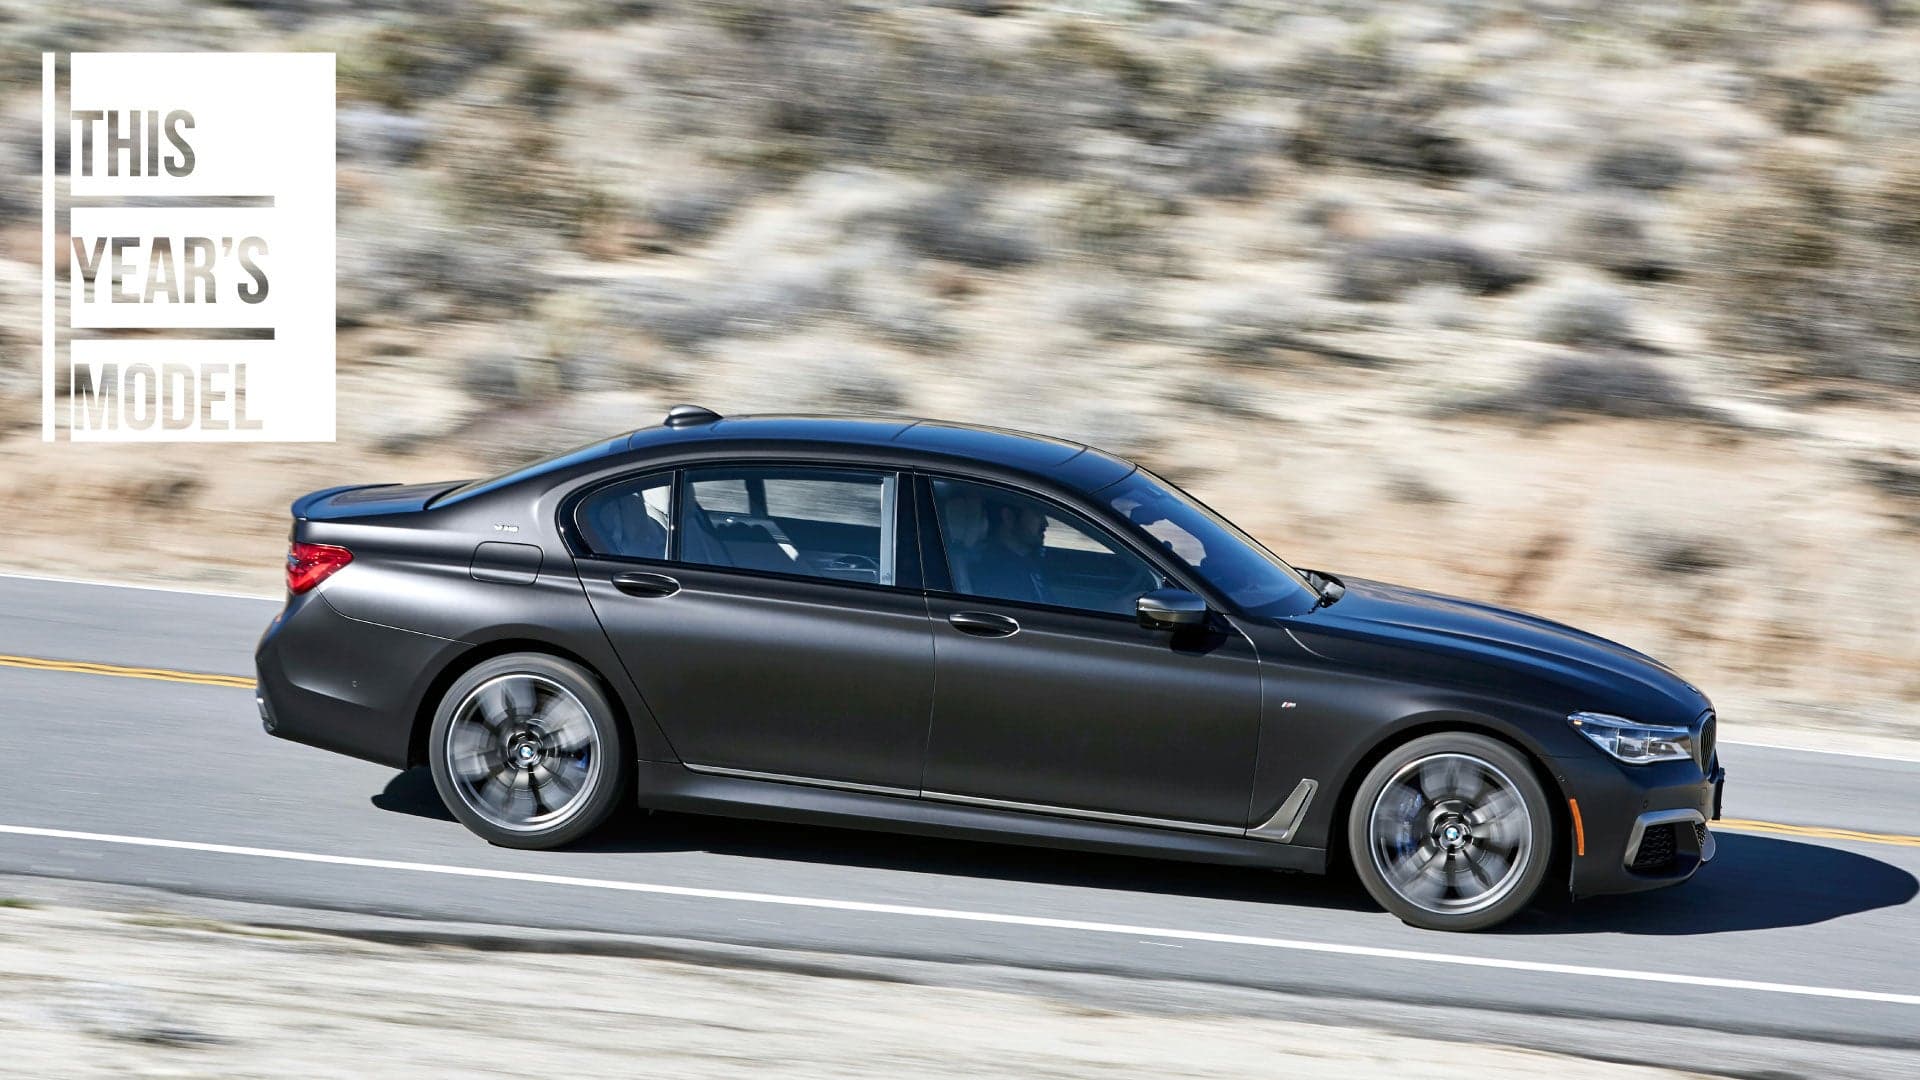 2017 BMW M760i xDrive Review: Is This V12 Better Than the B7 Alpina and Its V8?